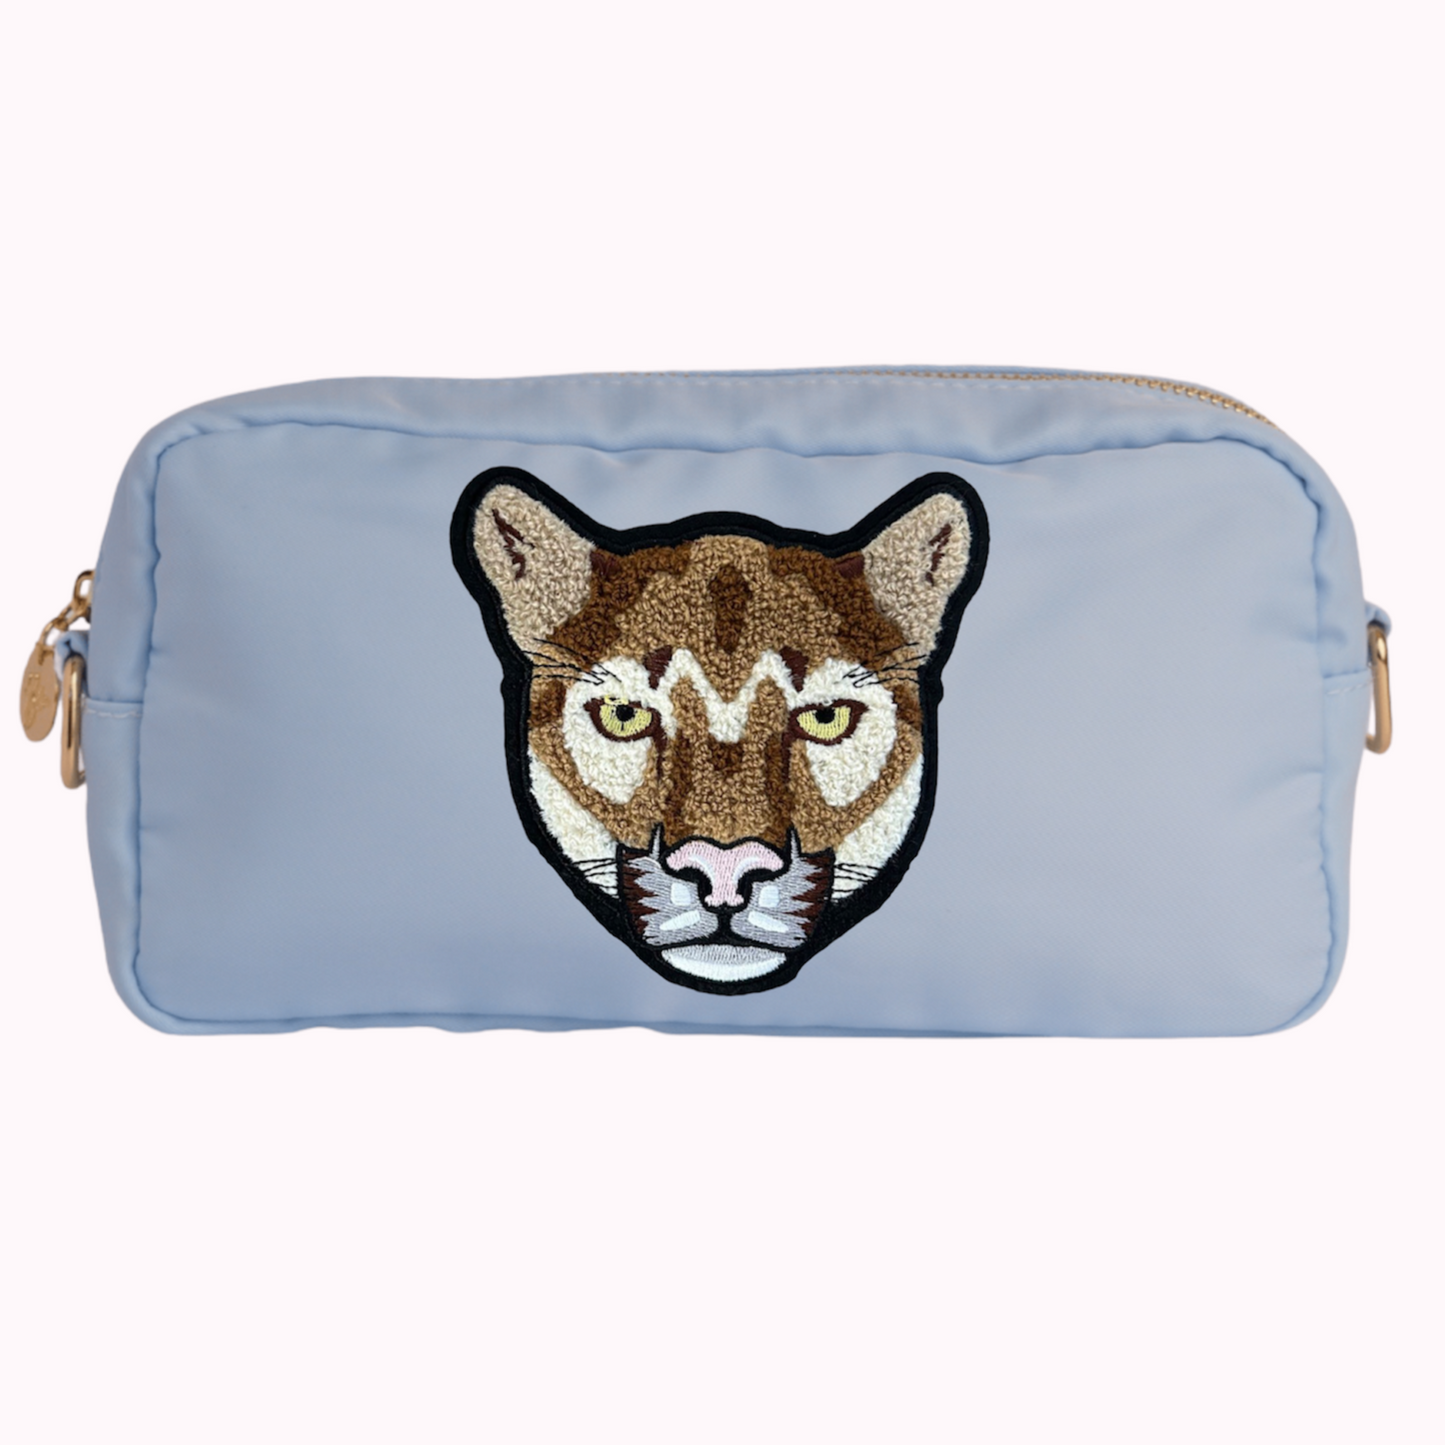 Light blue classic crossbody bag with cougar patch. 